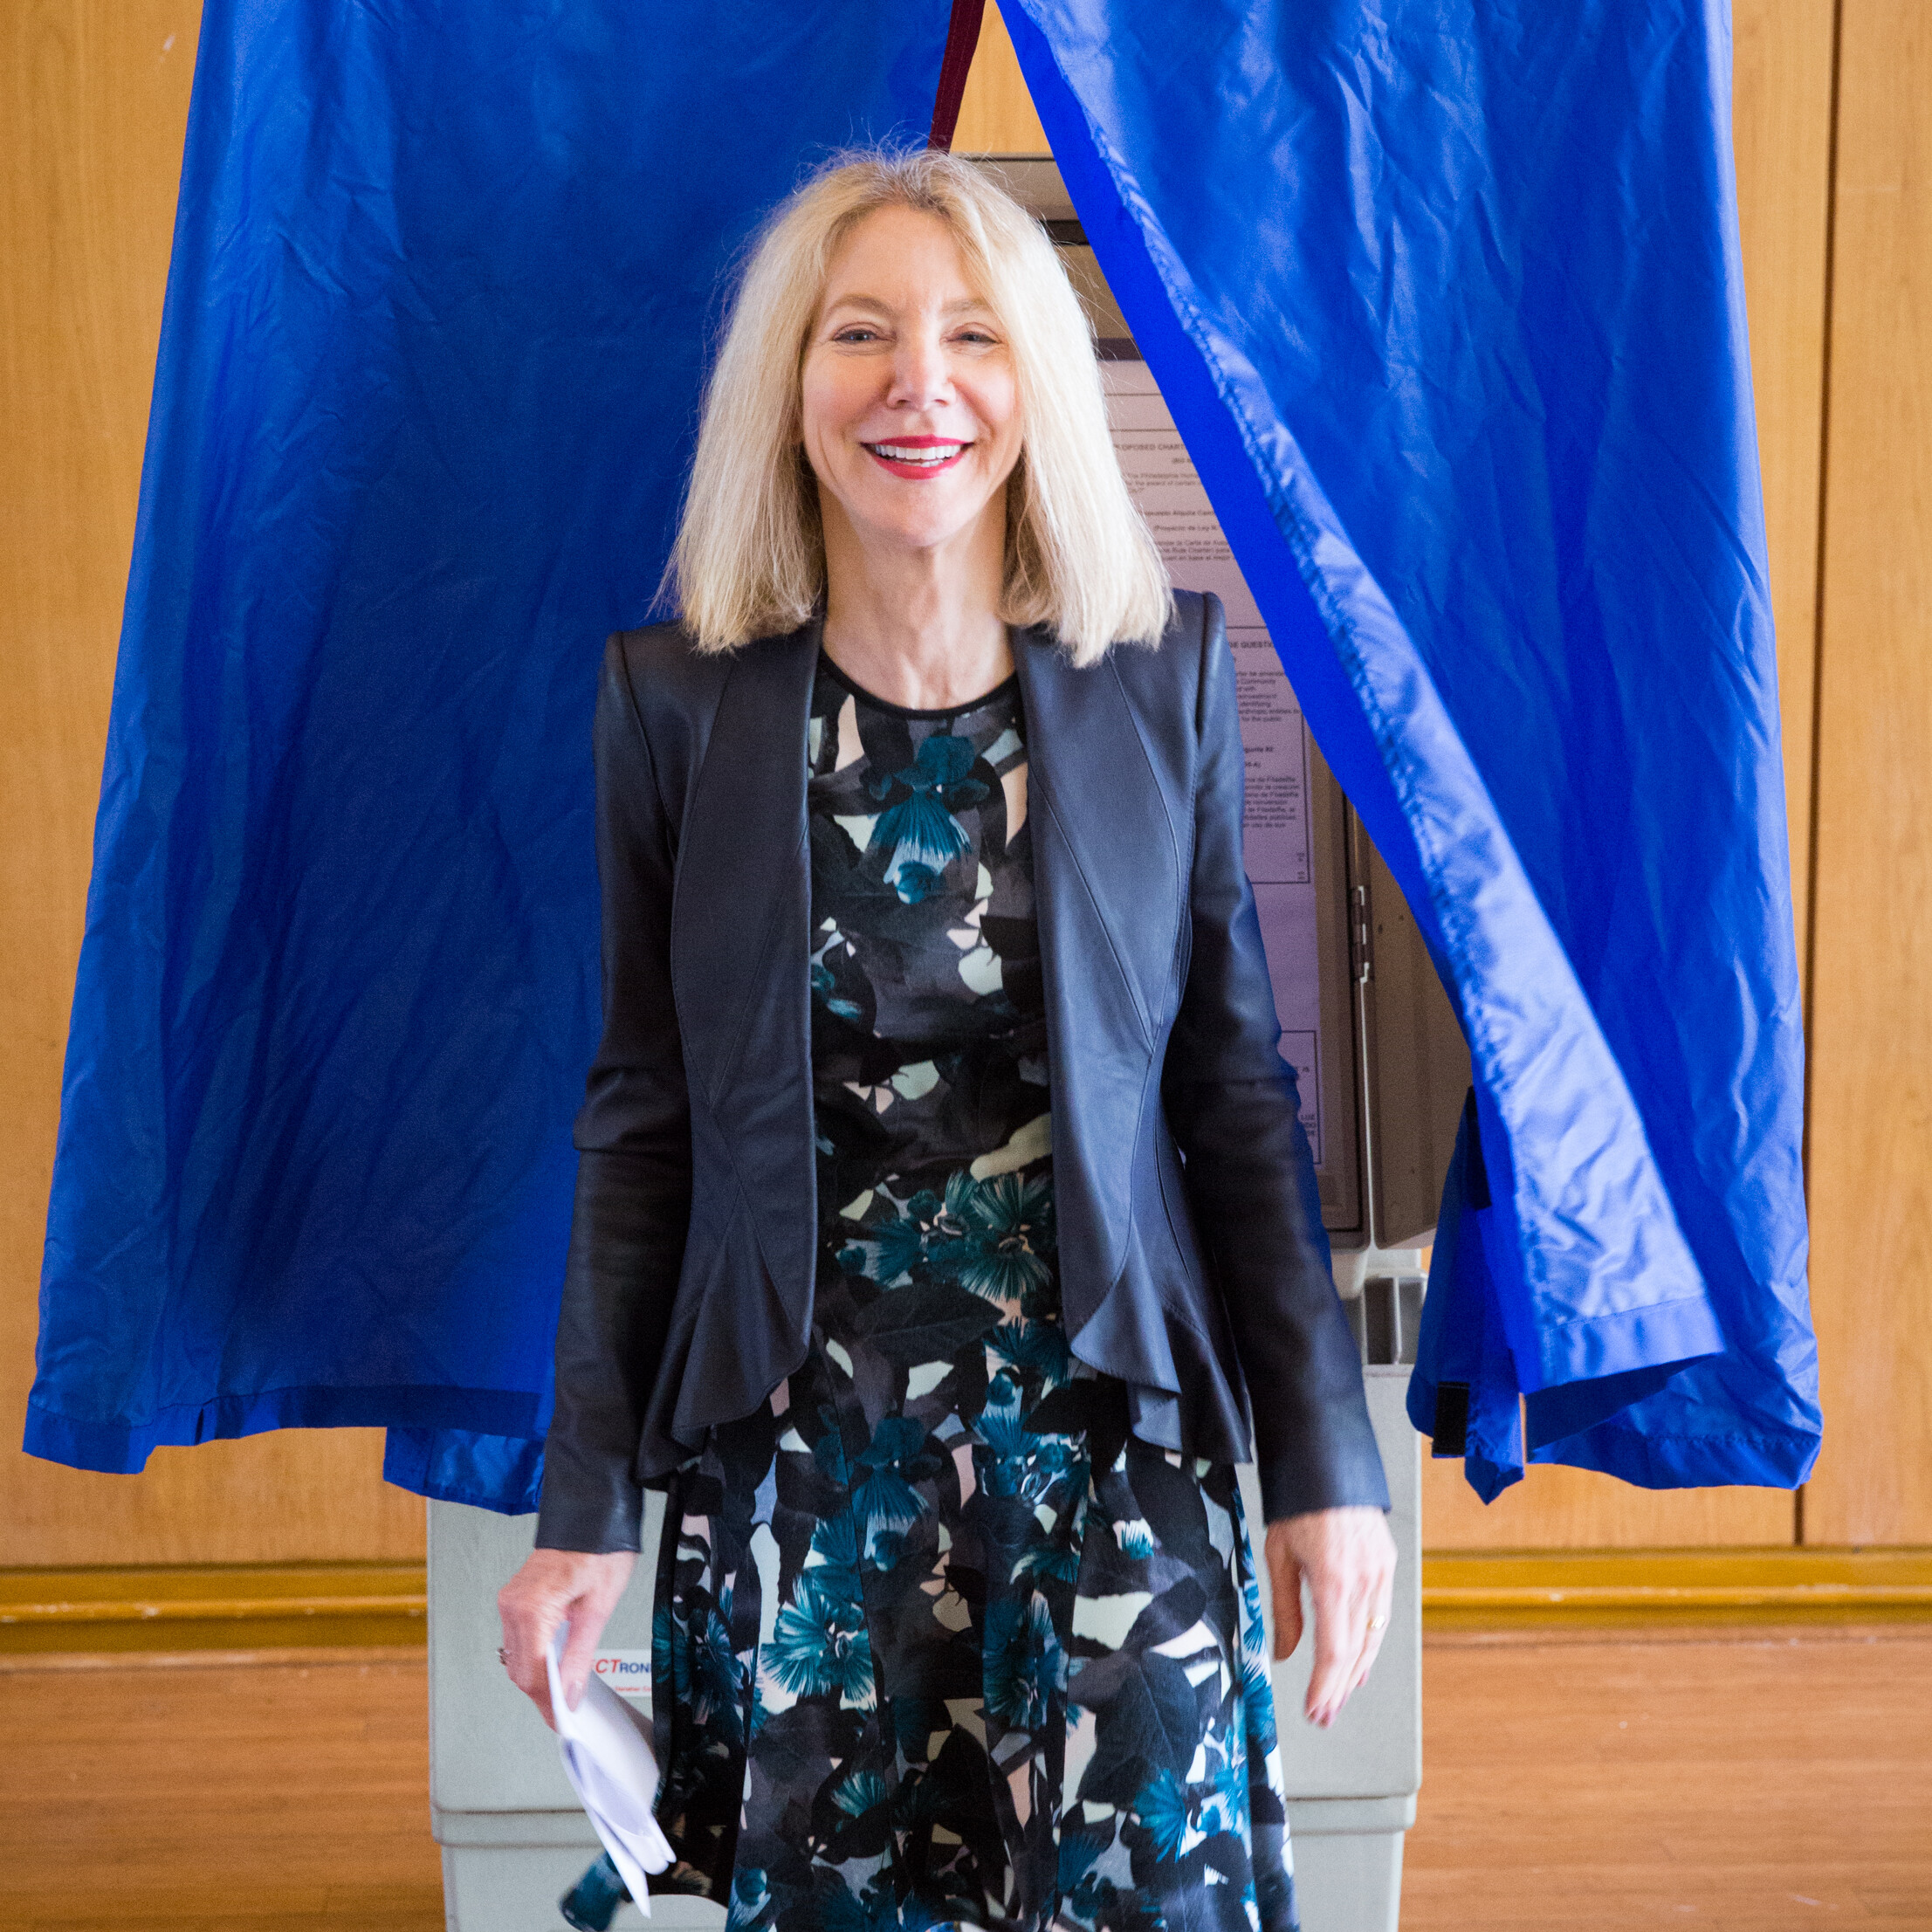 Amy Gutmann Votes in Primary Election 2017